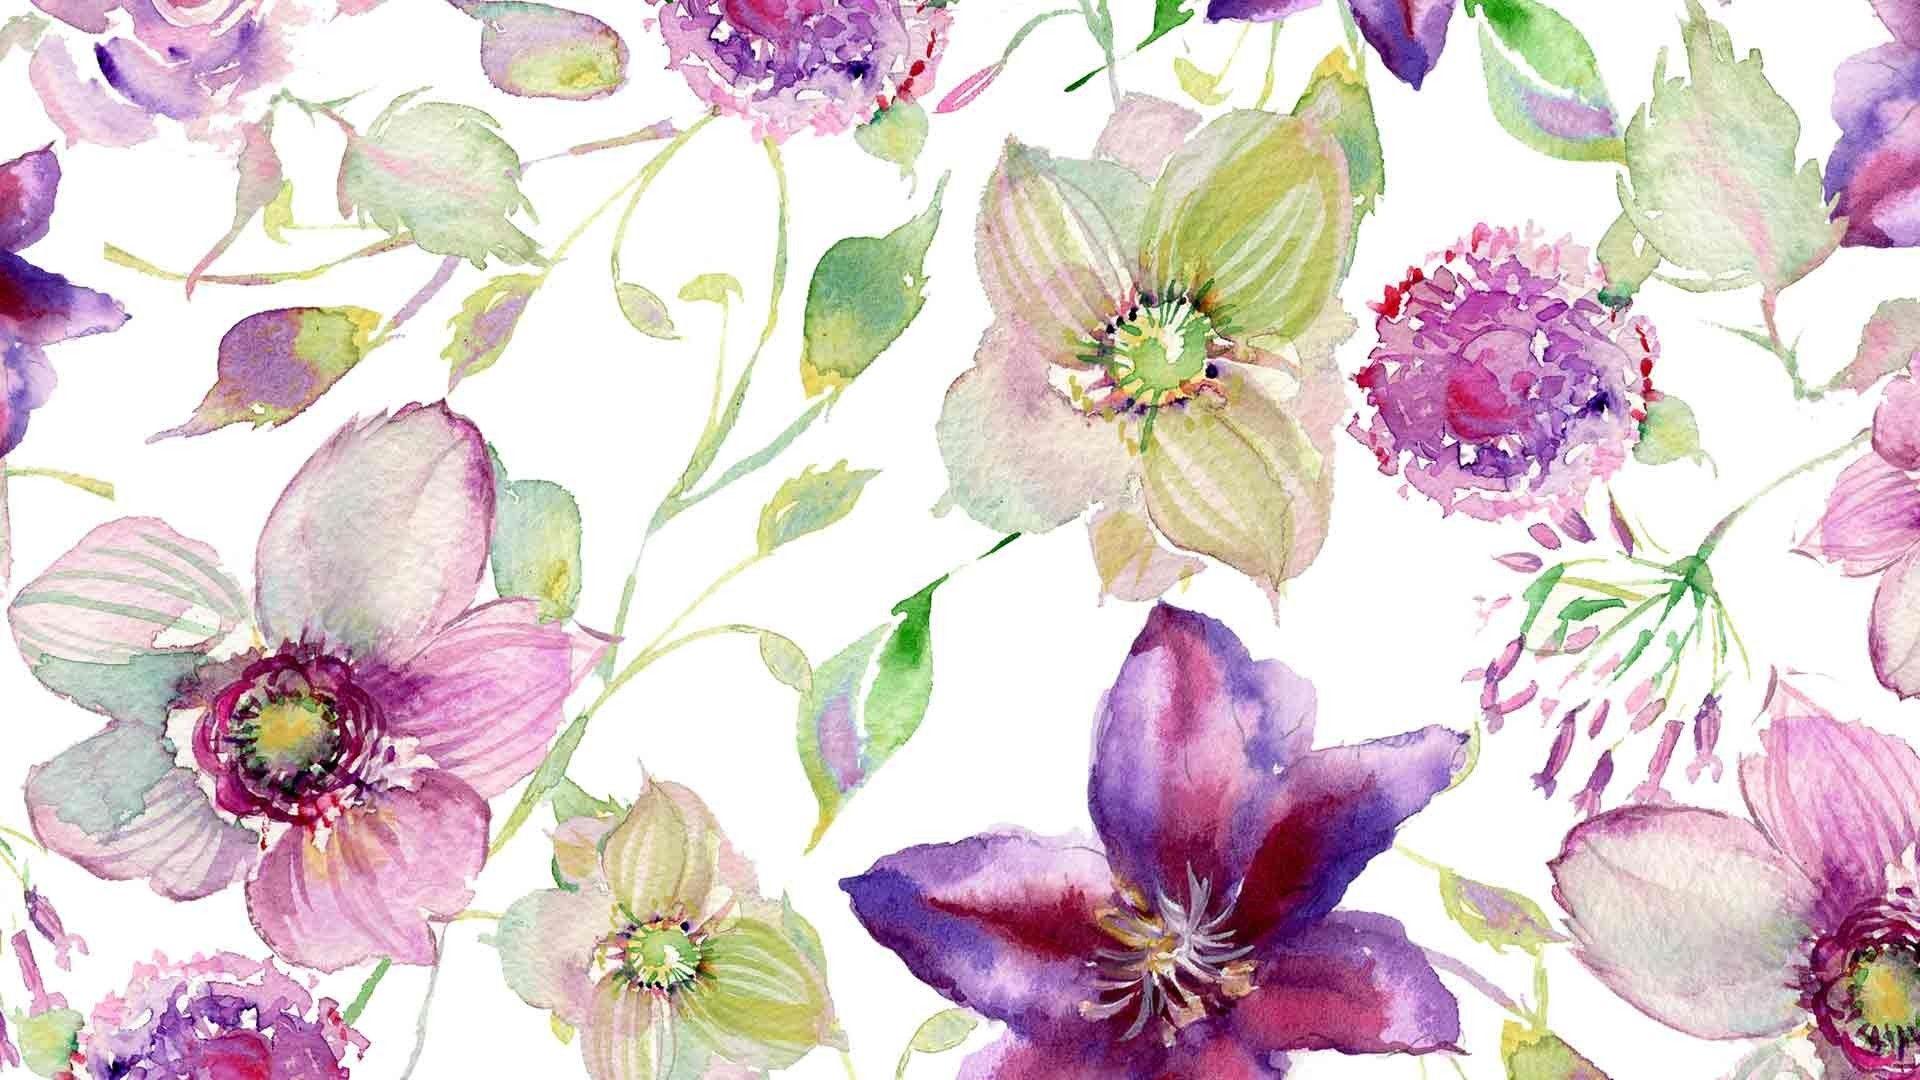 Amara Floral Wallpaper Mural Watercolor Floral Traditional or Removable 1920x1080